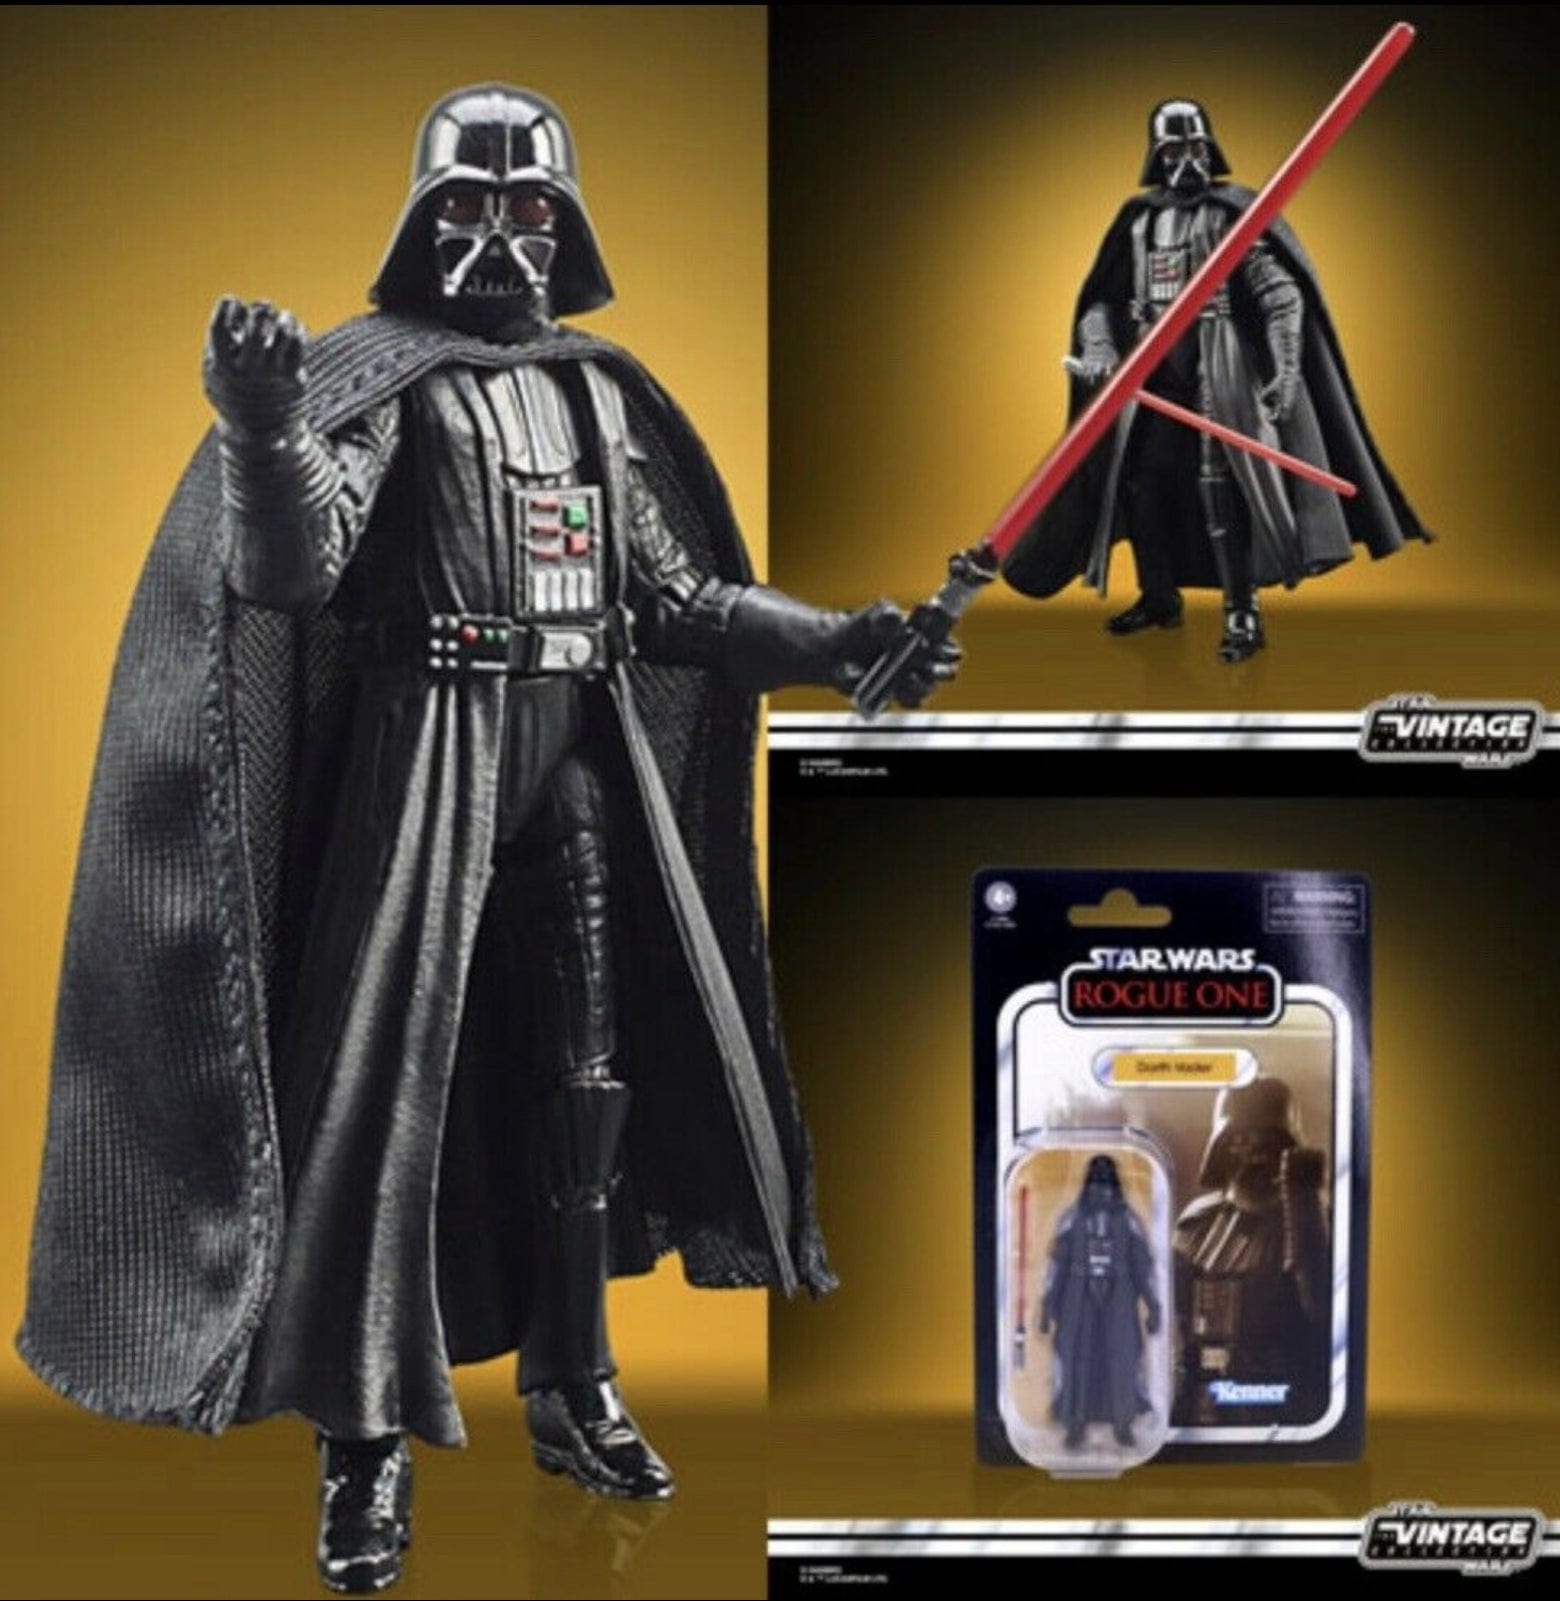 Star Wars The Vintage Collection: Rogue One Darth Vader 3.75-Inch Action Figure